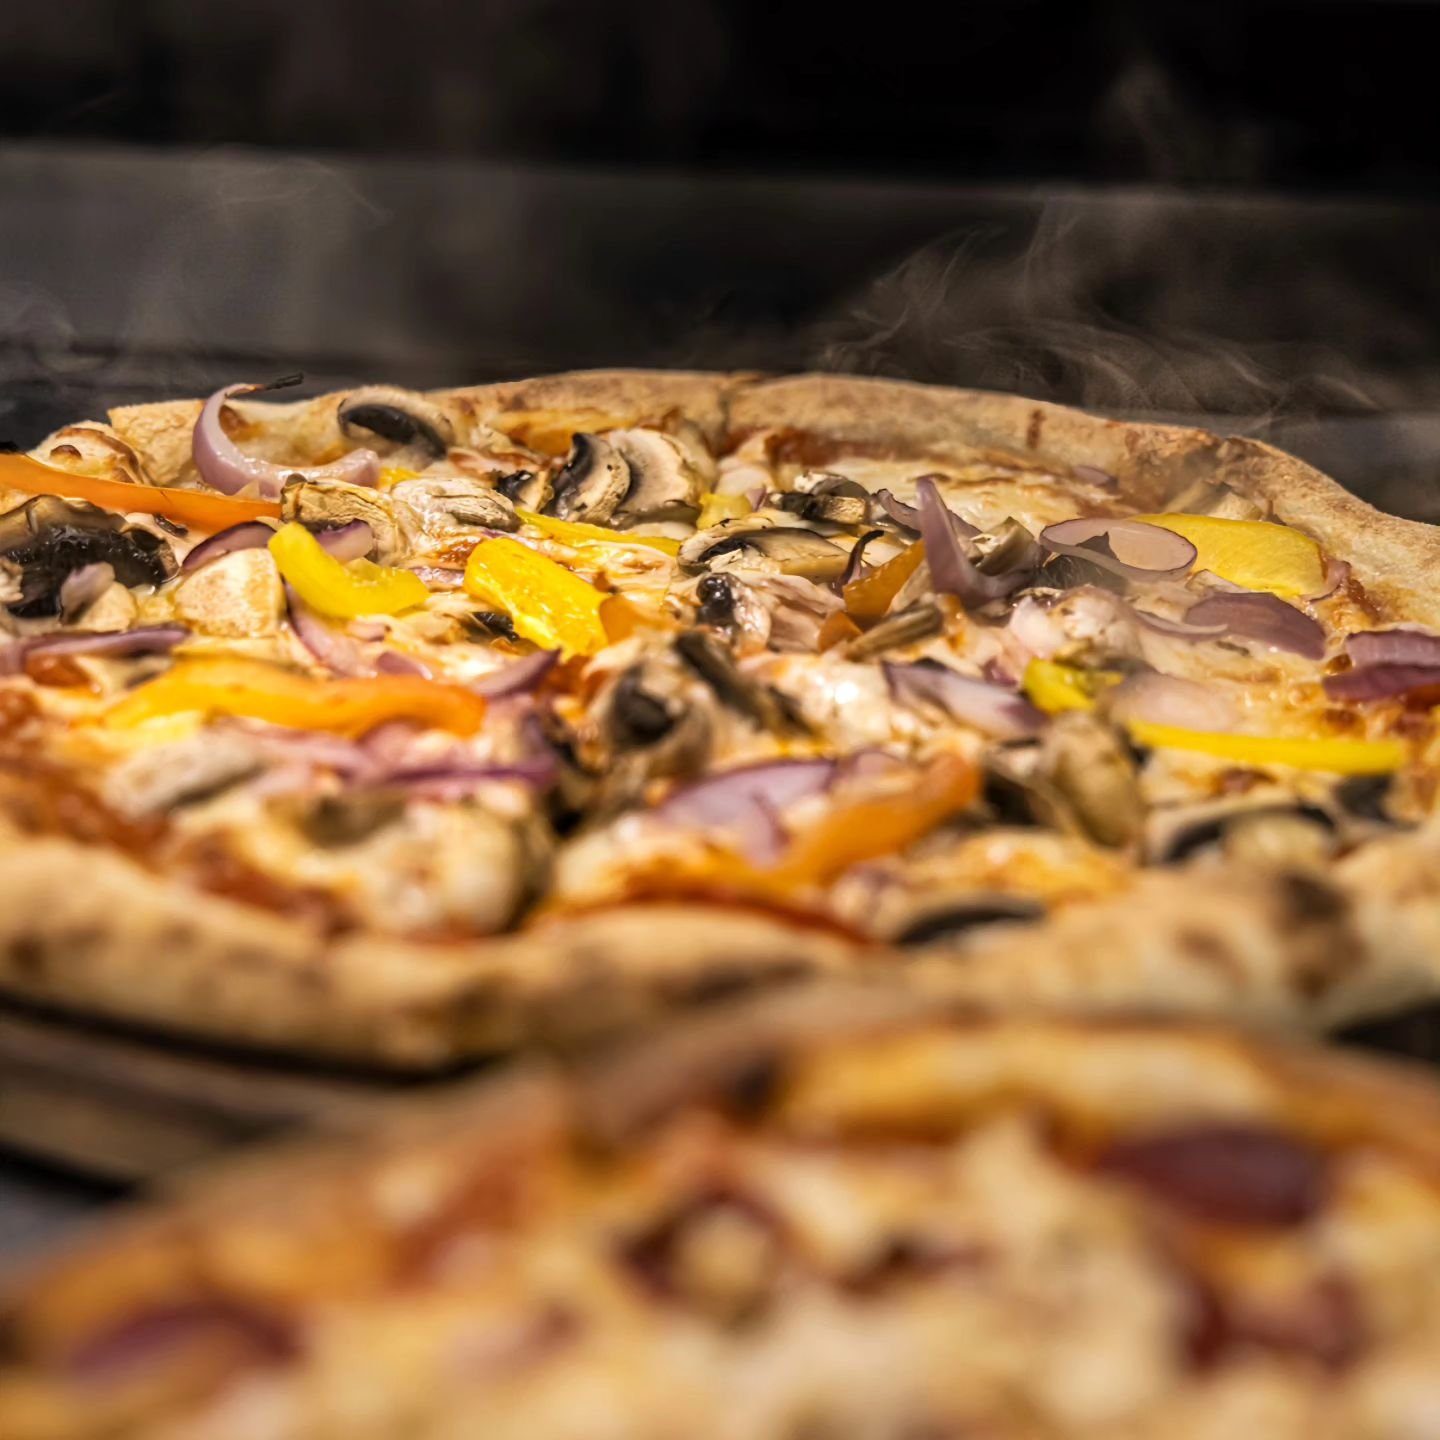 Craving a slice an authentic slice? 🍕

Our selection of sourdough Pizzas are all cooked fresh in our specialised pizza oven, ensuring a crispy crust and incredible flavour in every bite. Taste the difference at the Terrace! 

Pizzas available every 